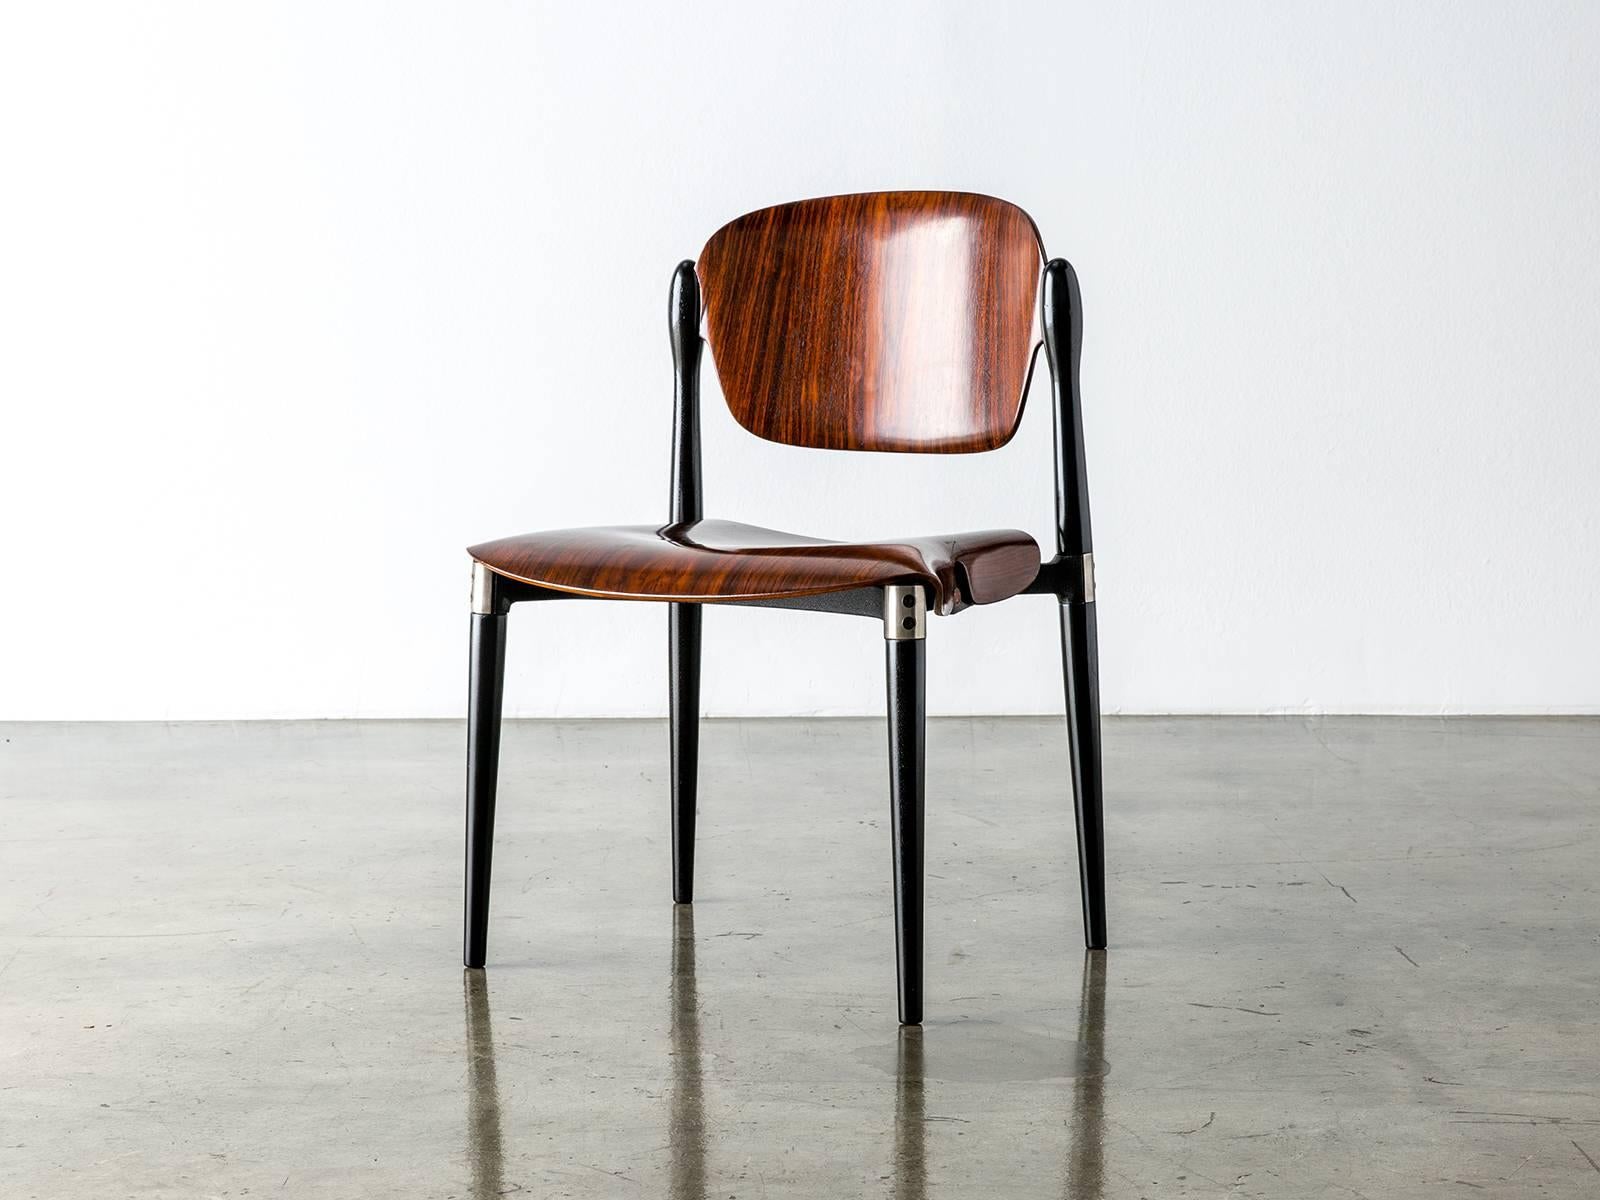 A compact and comfortable chair designed by Eugenio Gerli for Tecno in 1962 that suspends two molded rosewood panels to simple and elegant effect. Black lacquered legs are joined by a die-cast aluminum underside support and aluminum fittings. The